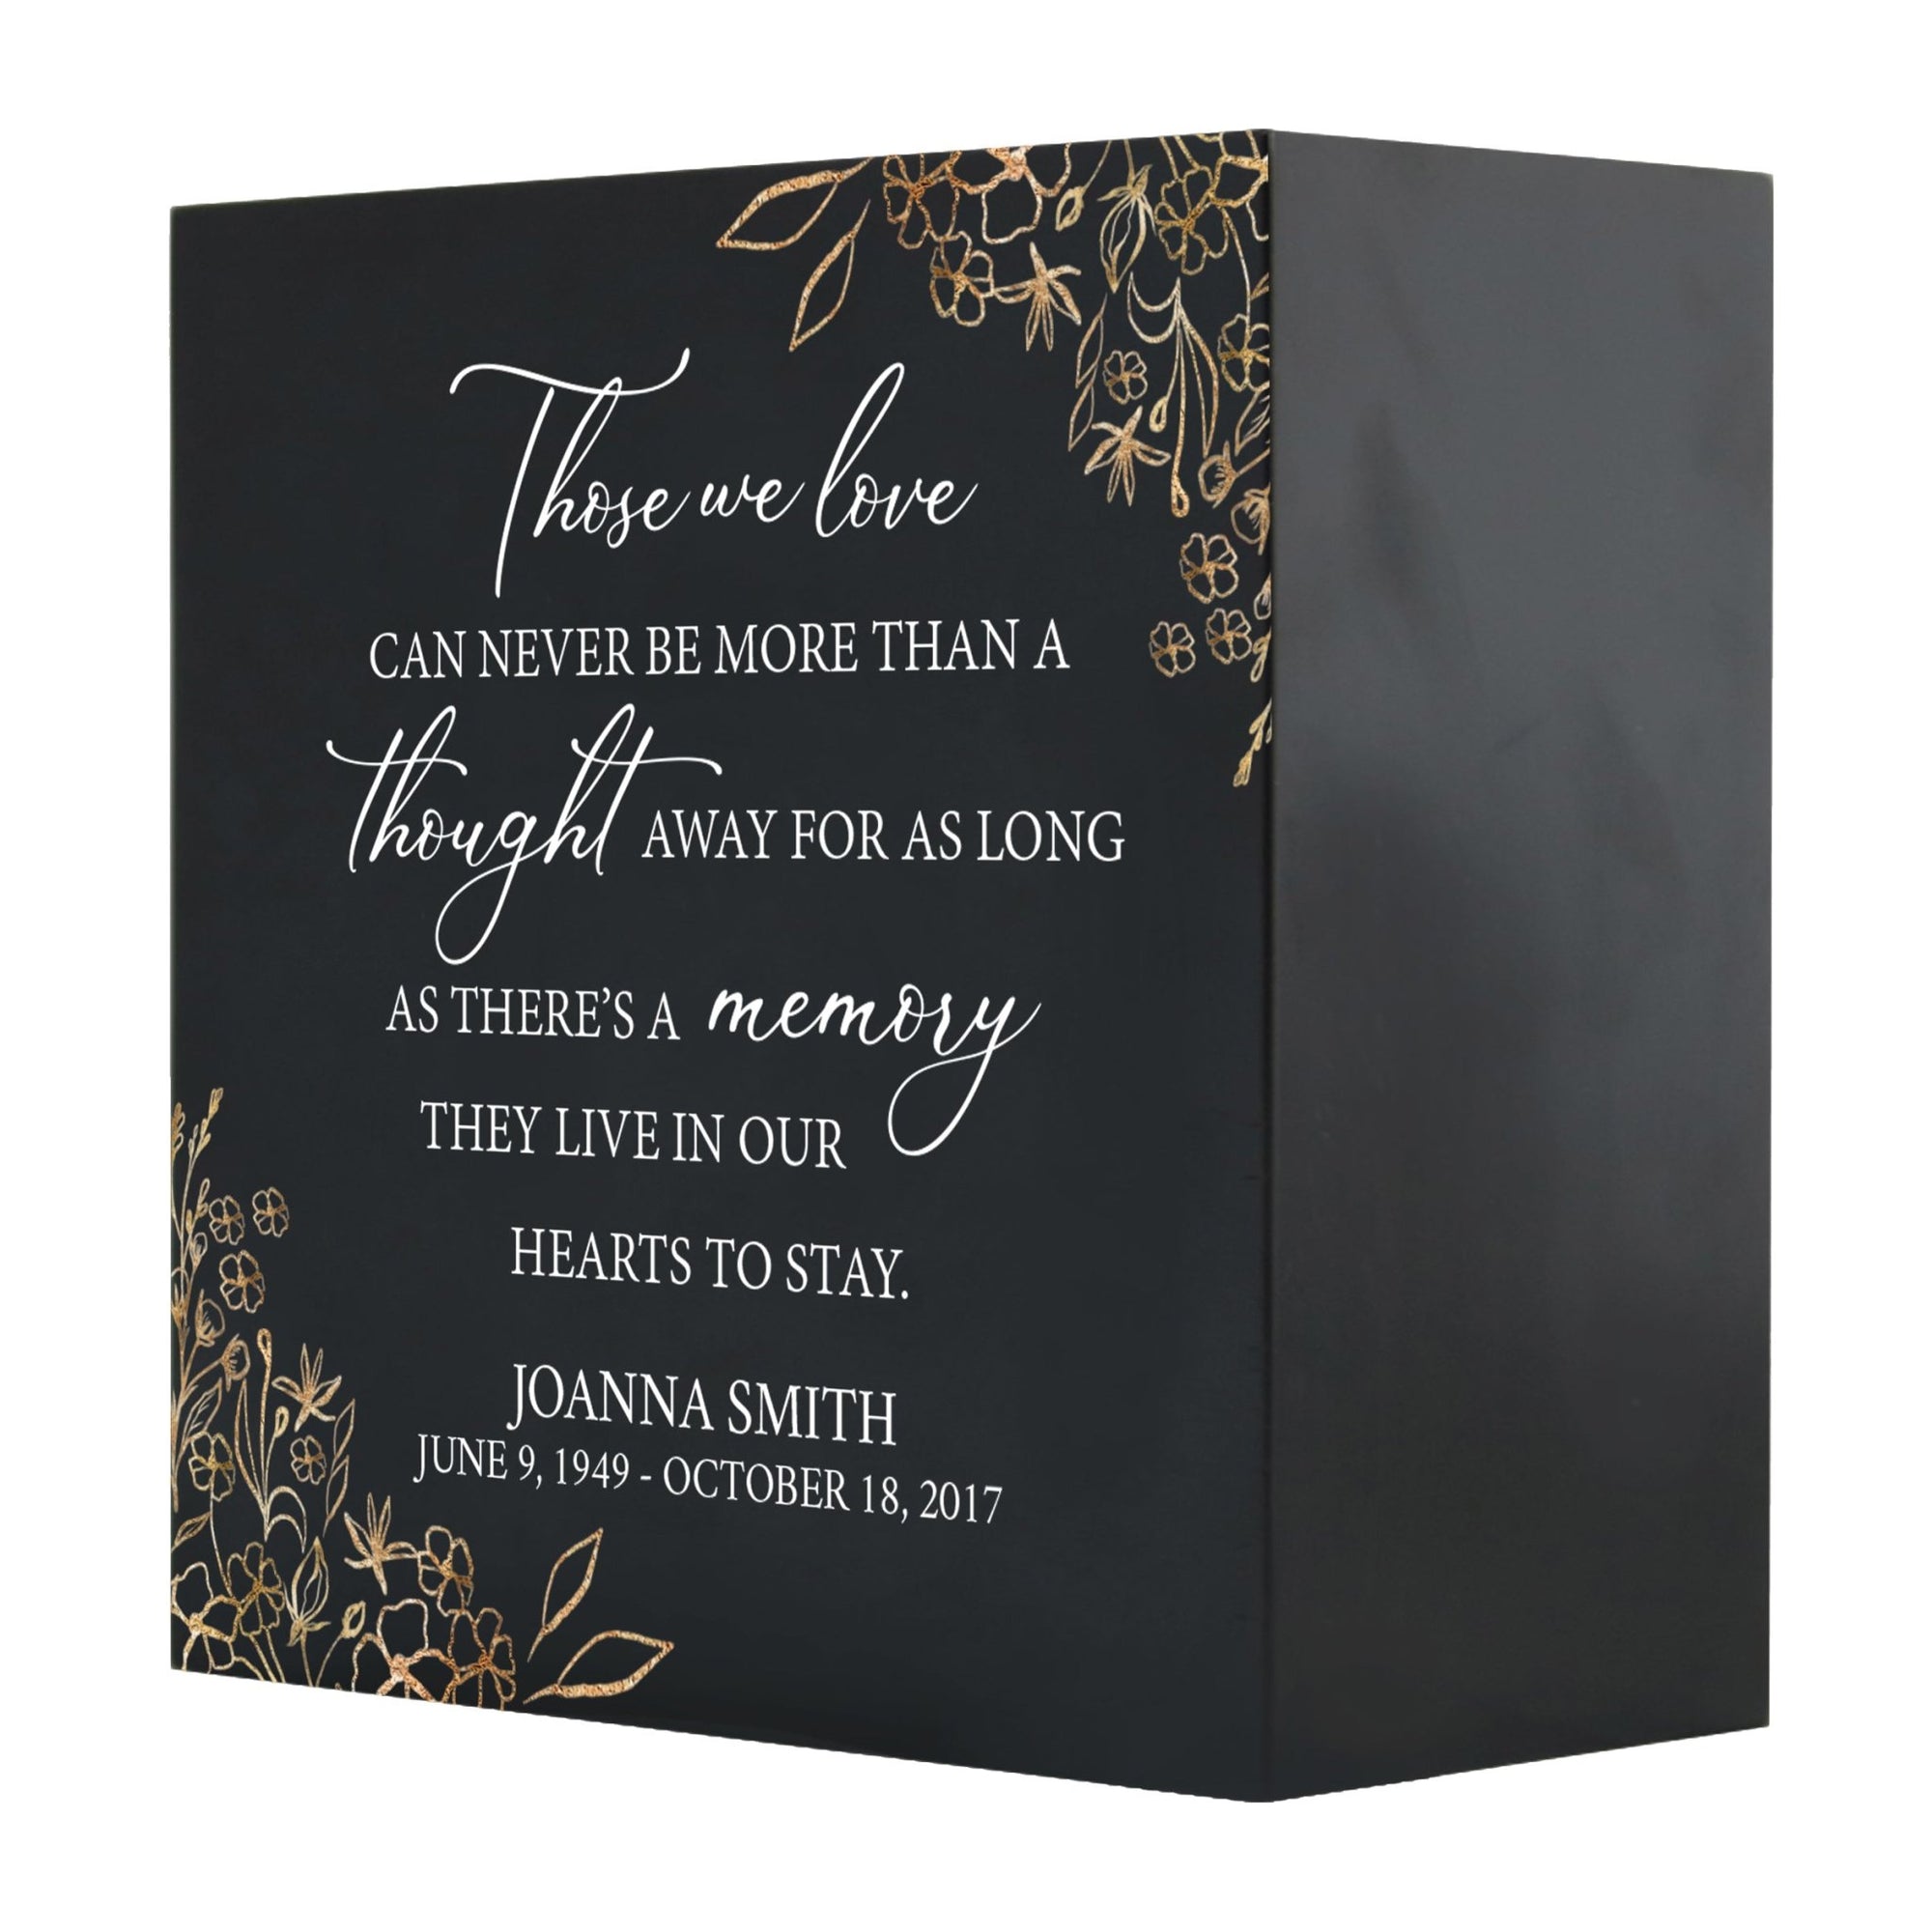 Personalized Modern Inspirational Memorial Wooden Shadow Box and Urn 6x6 holds 53 cu in of Human Ashes - Those We Love (More) - LifeSong Milestones